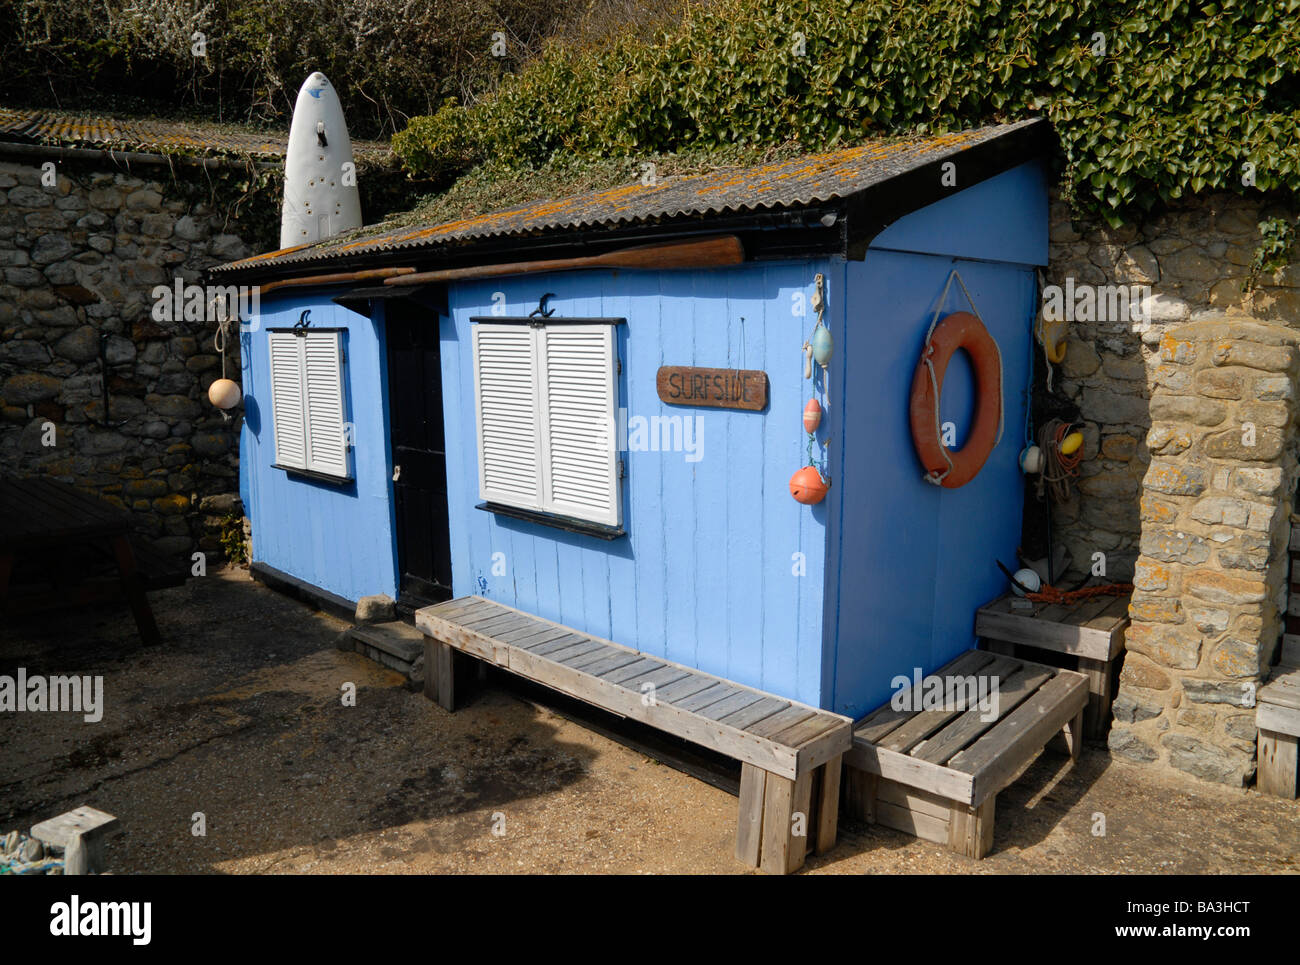 Small shed 'Surfside' built at a wall, St. Catherins Bay, Niton Undercliff, Isle of Wight, UK Stock Photo